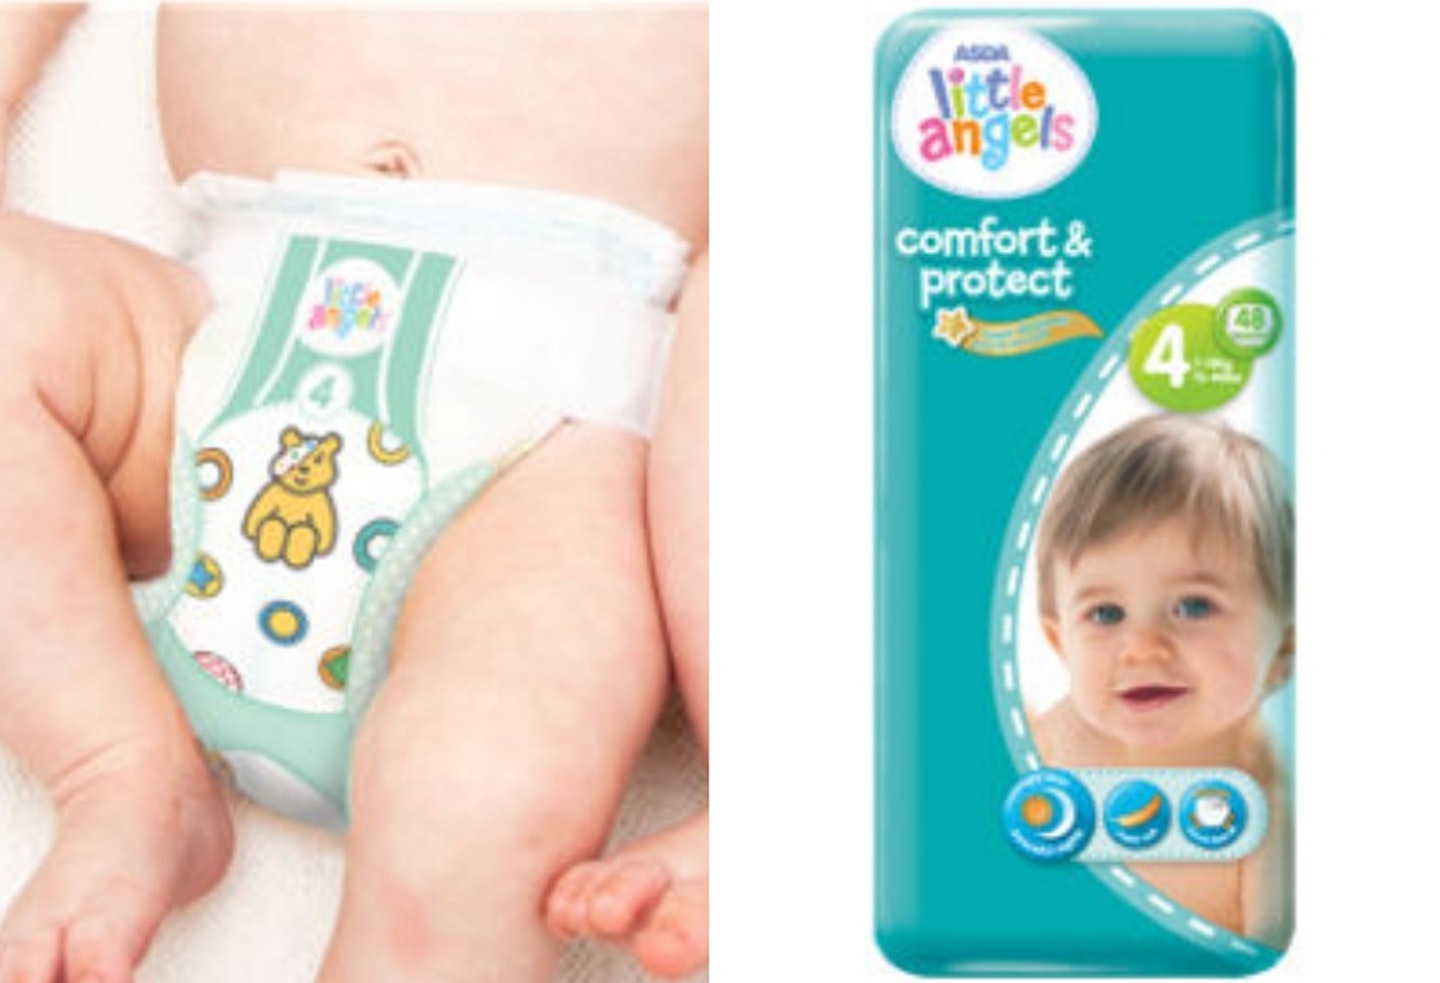 ASDA Little Angels Comfort & Protect review